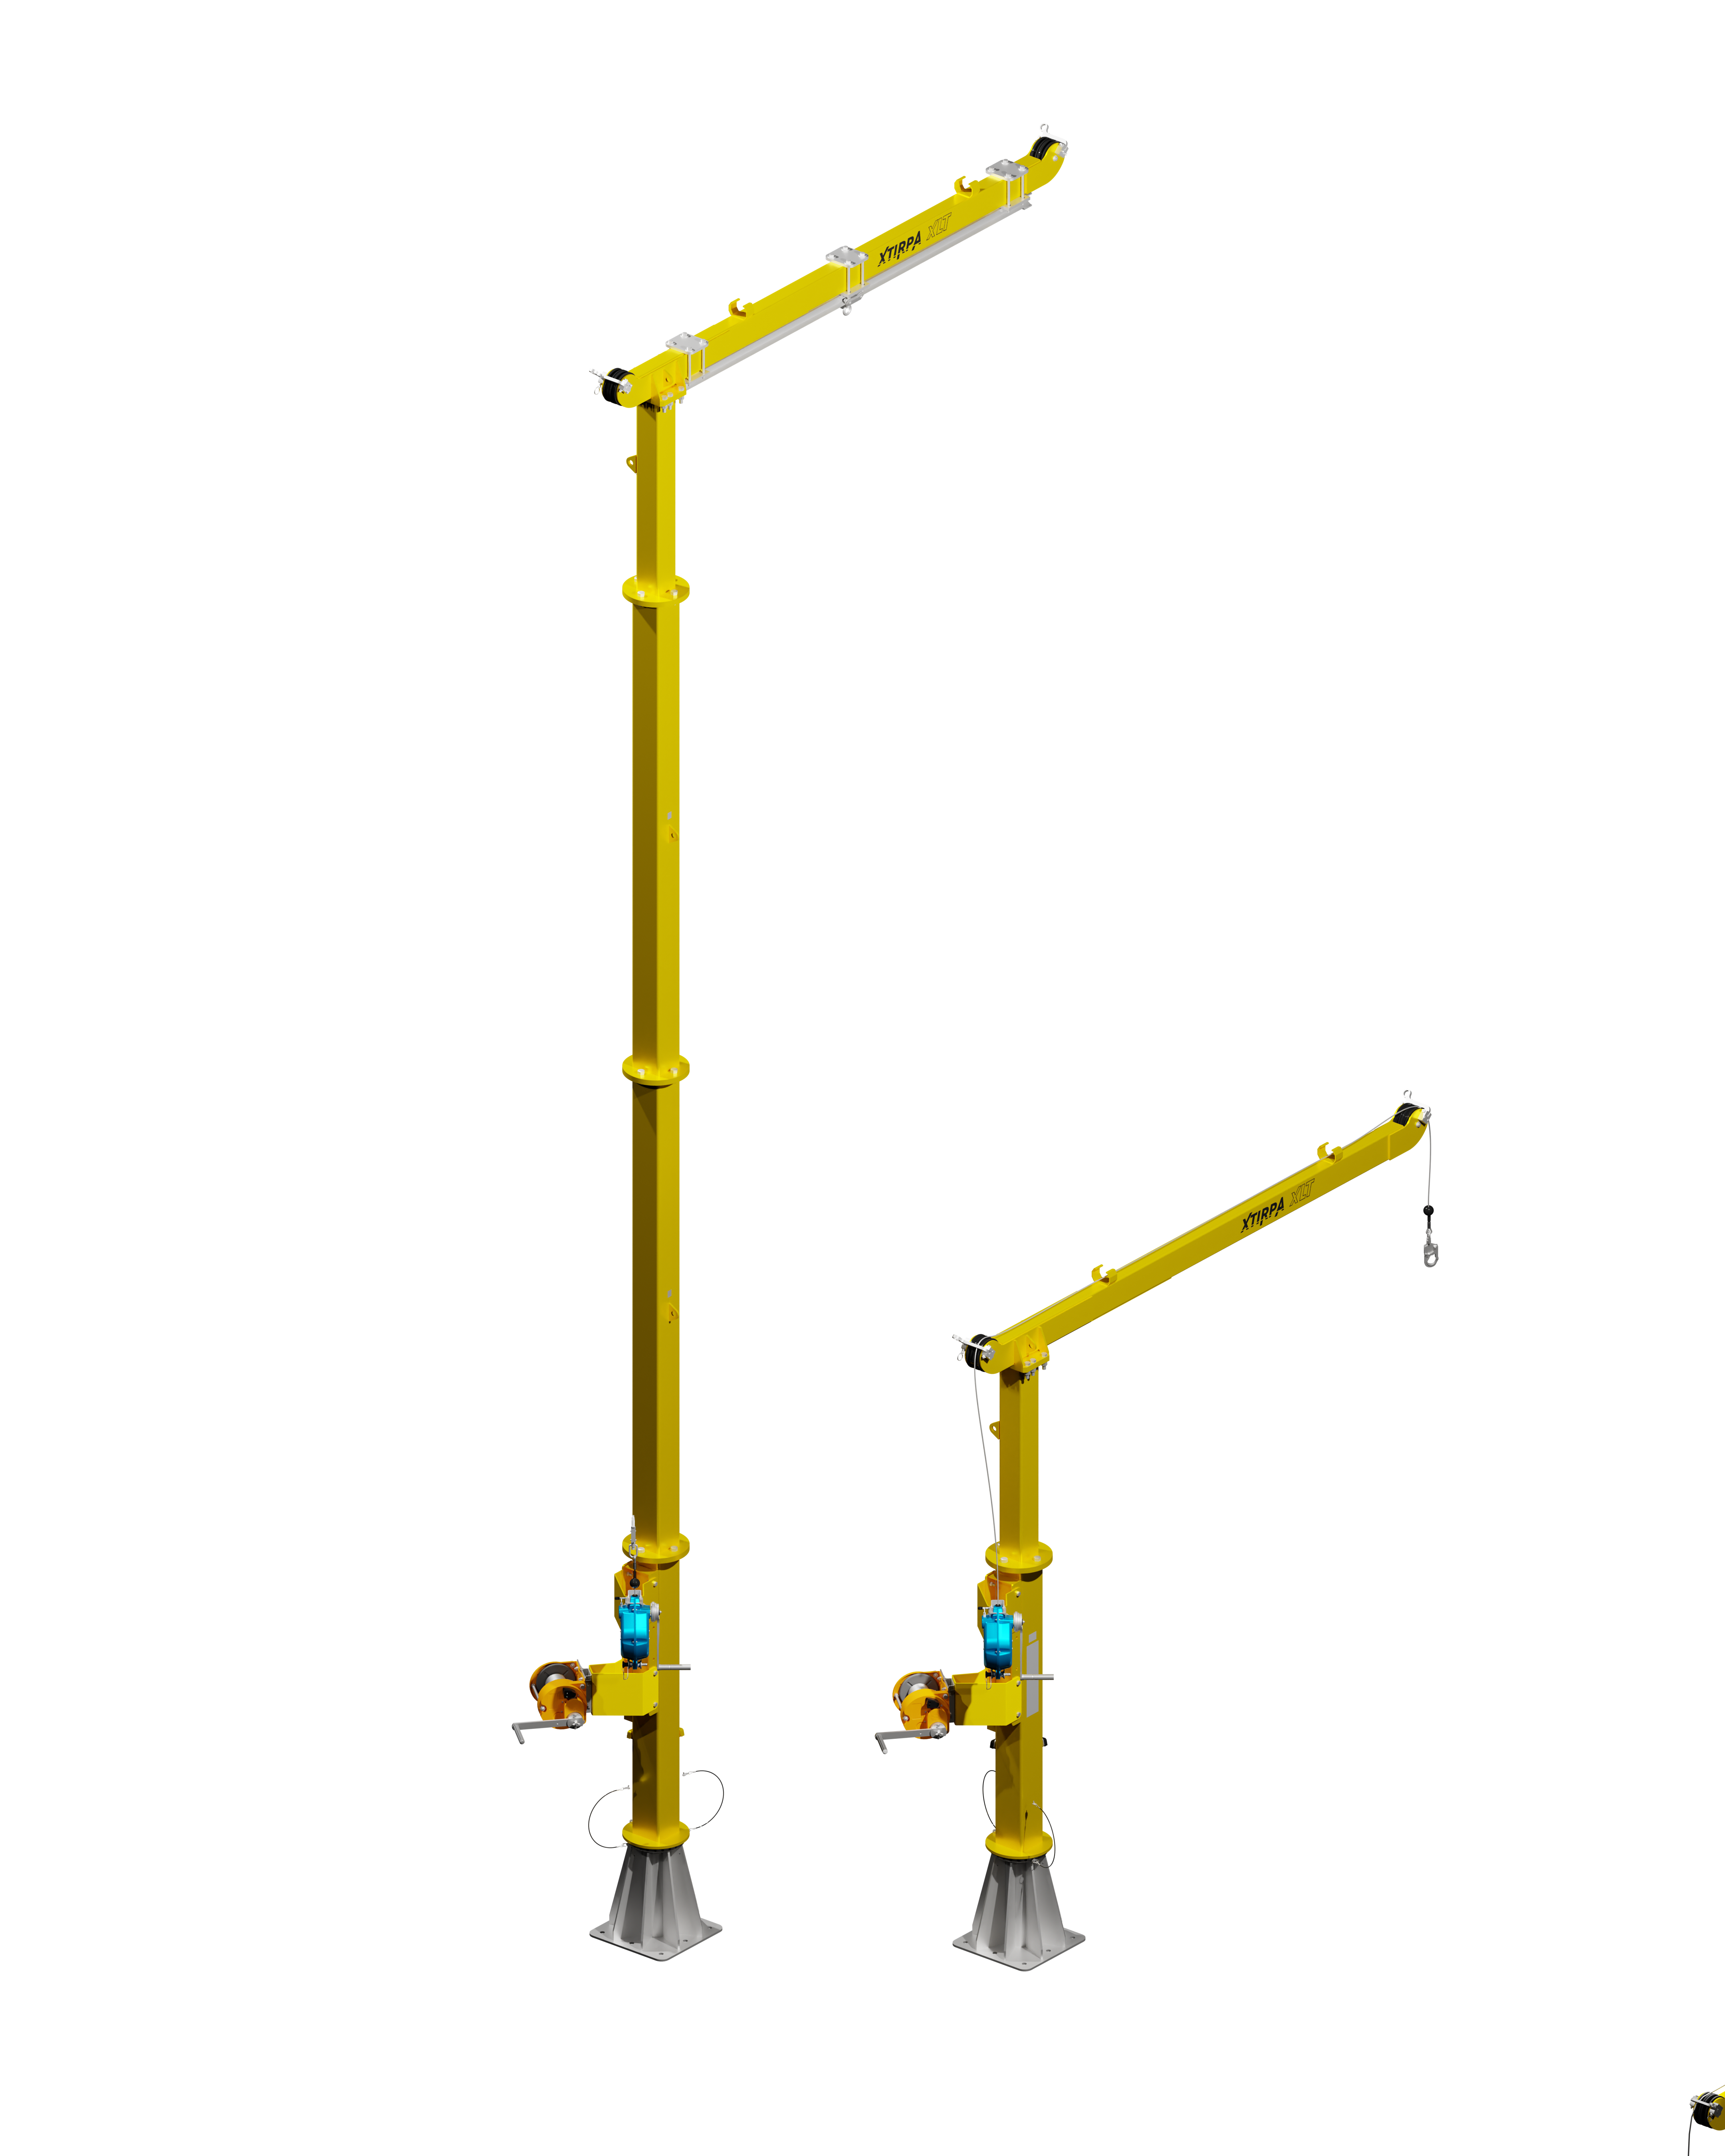 XLT davit are deployed for fall protection